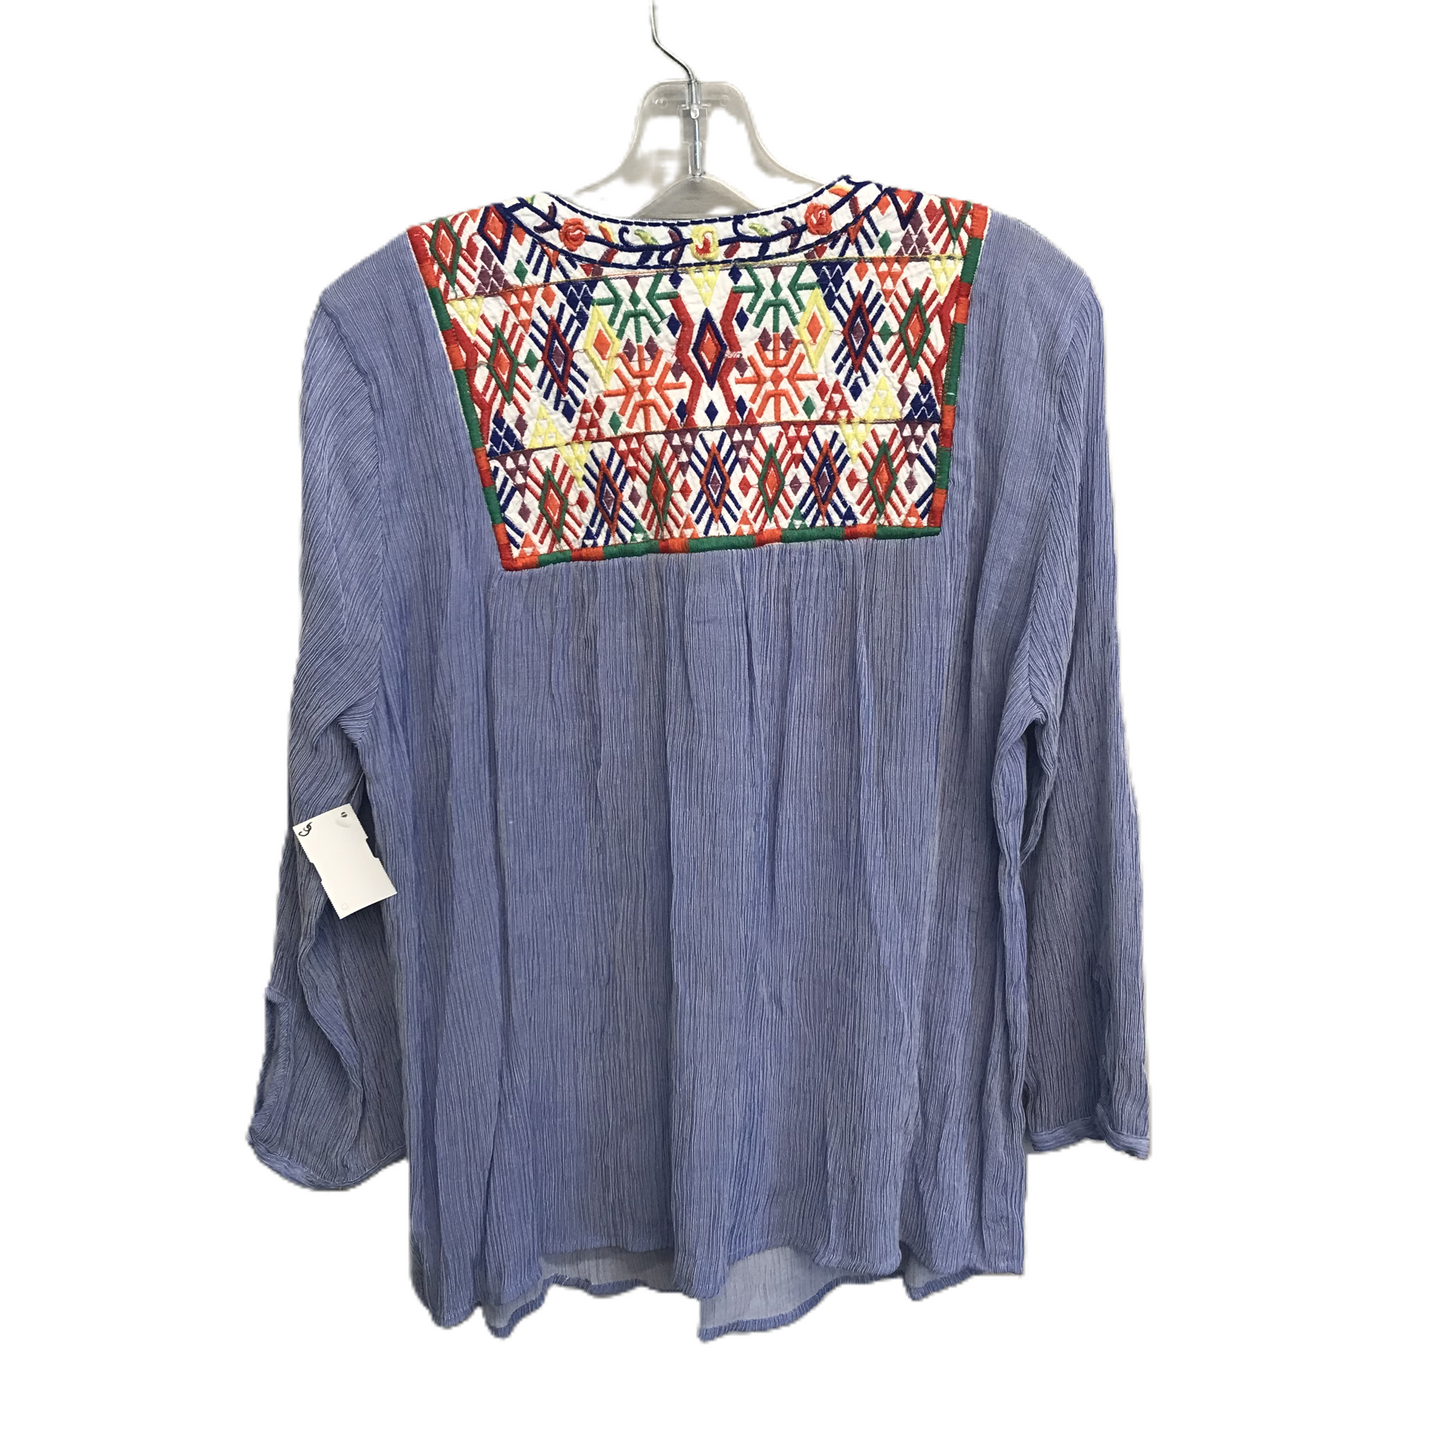 Multi-colored Top Long Sleeve By Cupio, Size: Xl